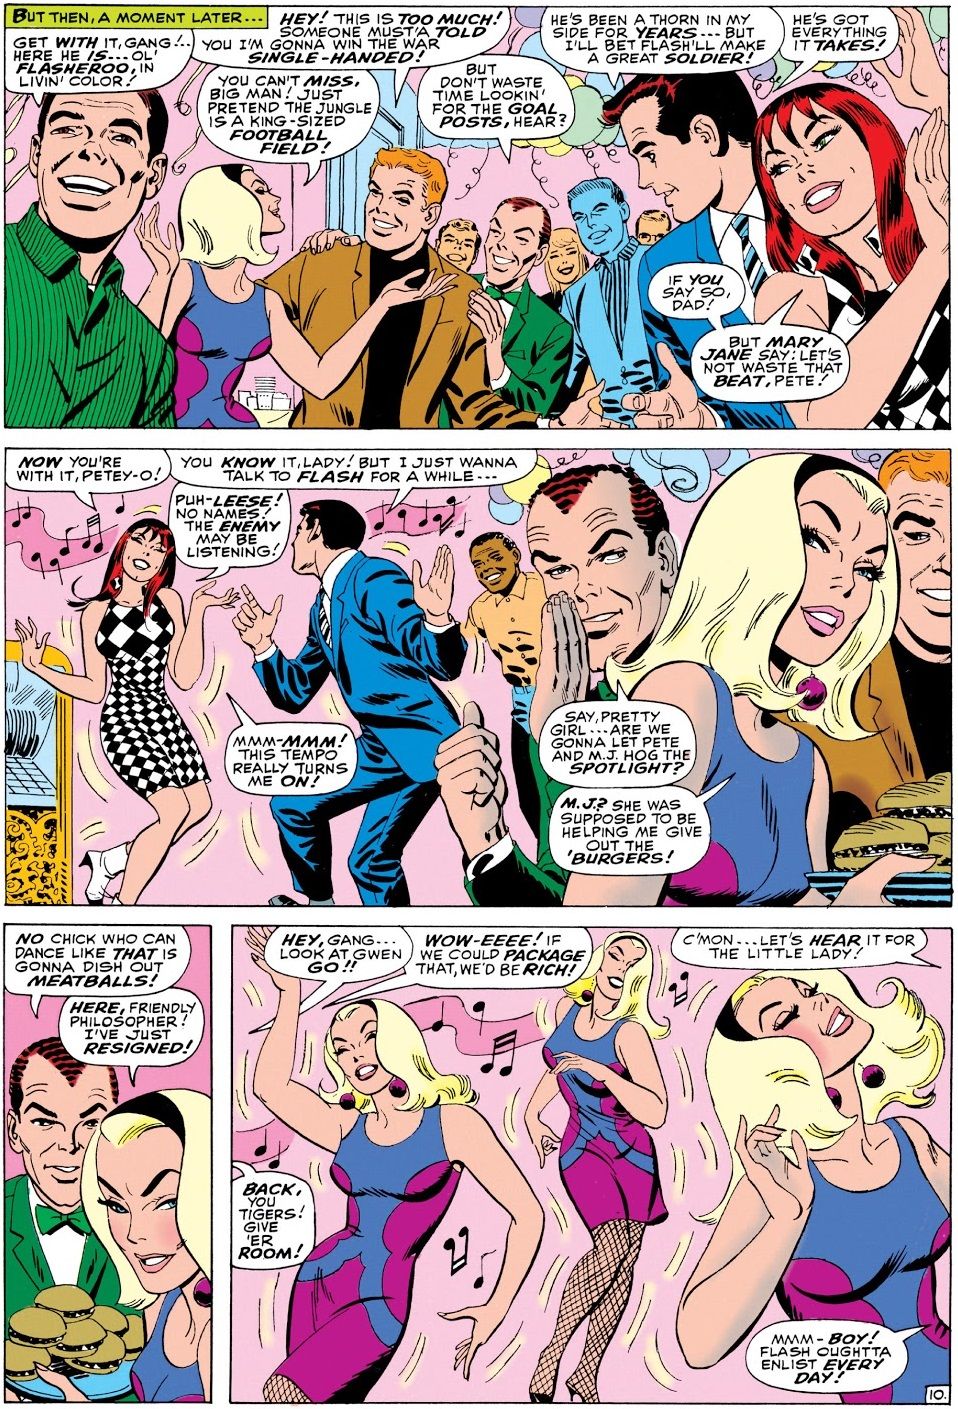 Gwen Stacy is dancing sexily